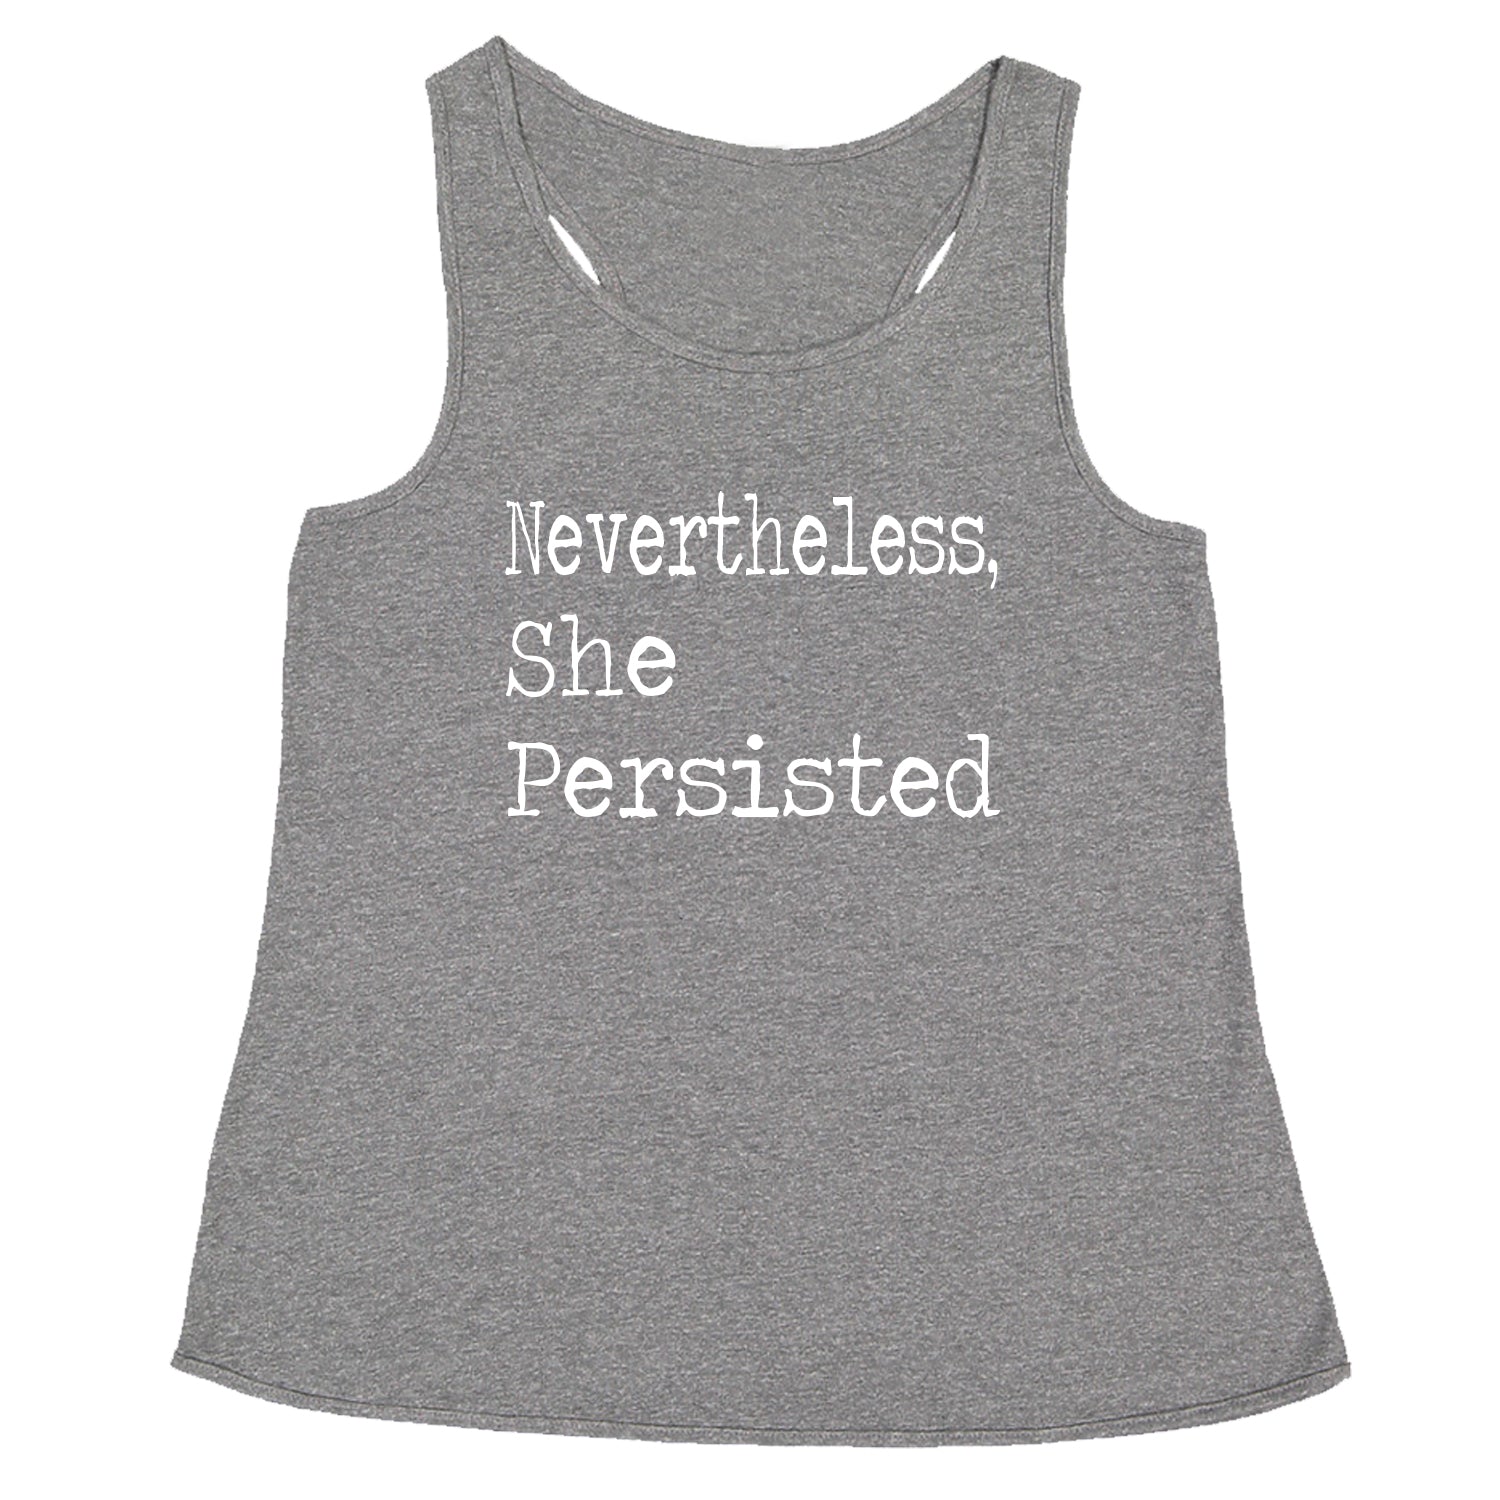 Nevertheless, She Persisted Racerback Tank Top for Women - Expression Tees